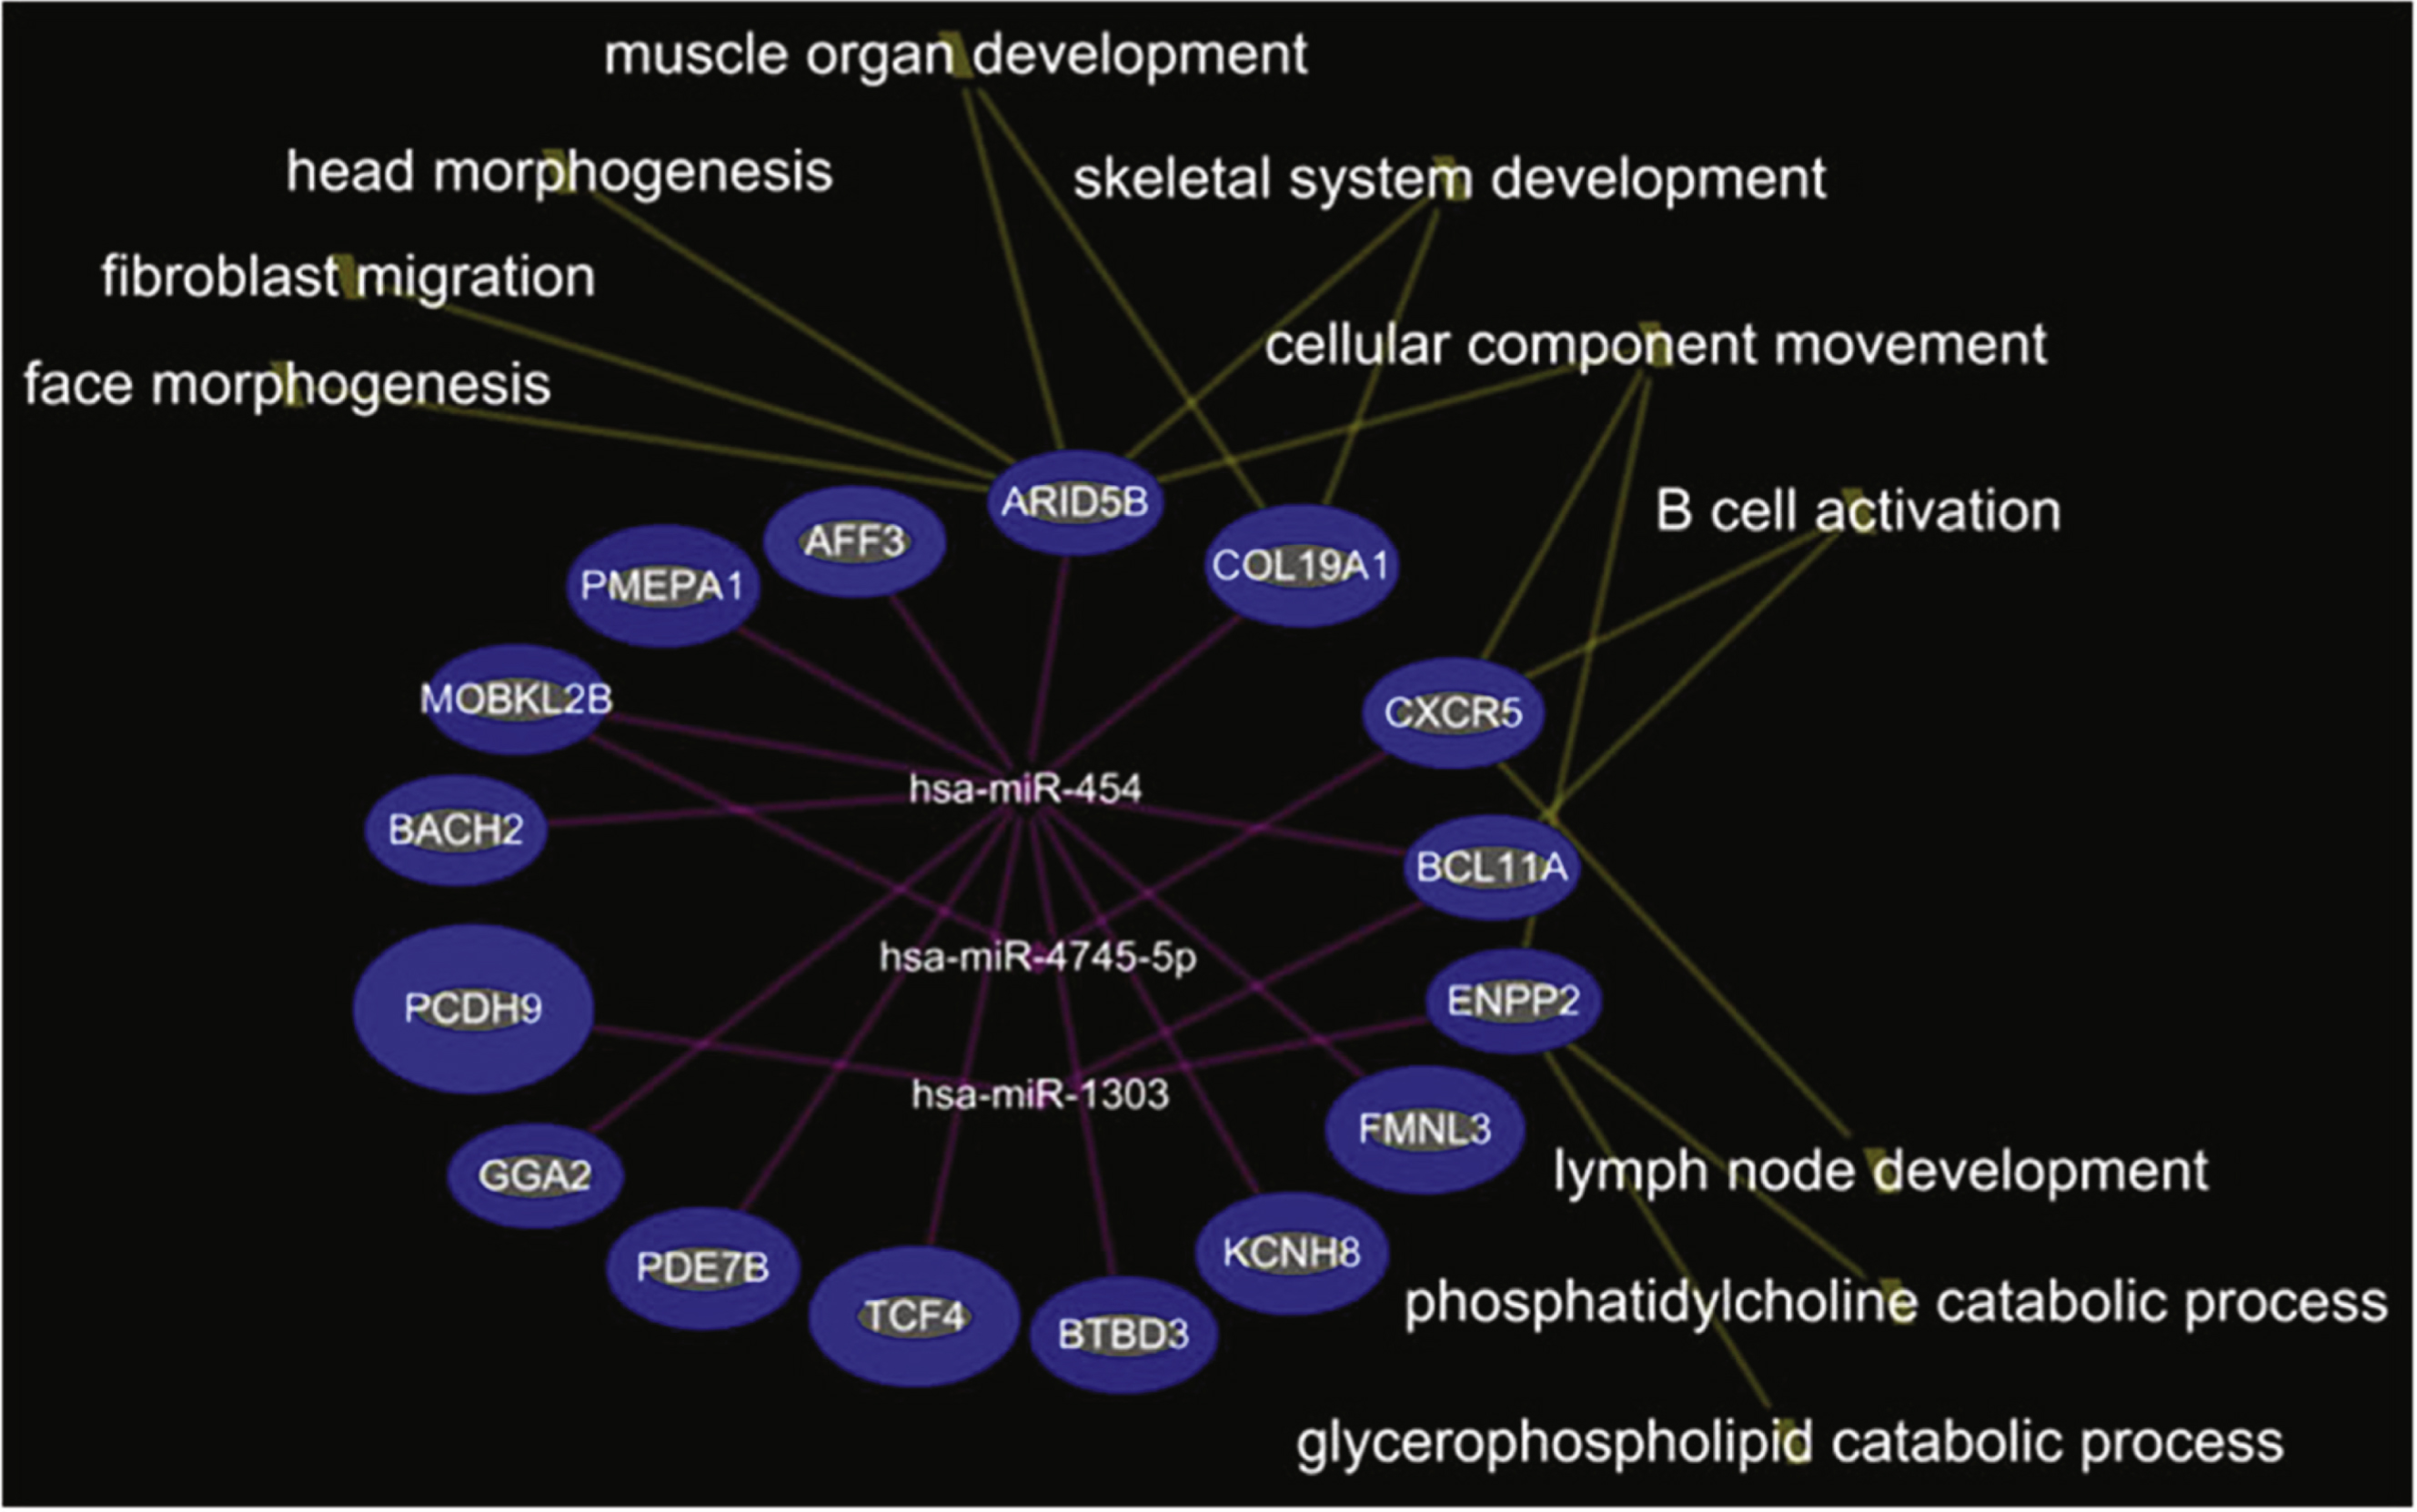 Integrated mRNA-miRNA functional analysis showing the network between under-expressed mRNAs and over-expressed miRNAs in DMD-YpostTx as compared to DMD-YpreTx, and associated functions (such as muscle organ development) of the mRNAs-miRNAs network.